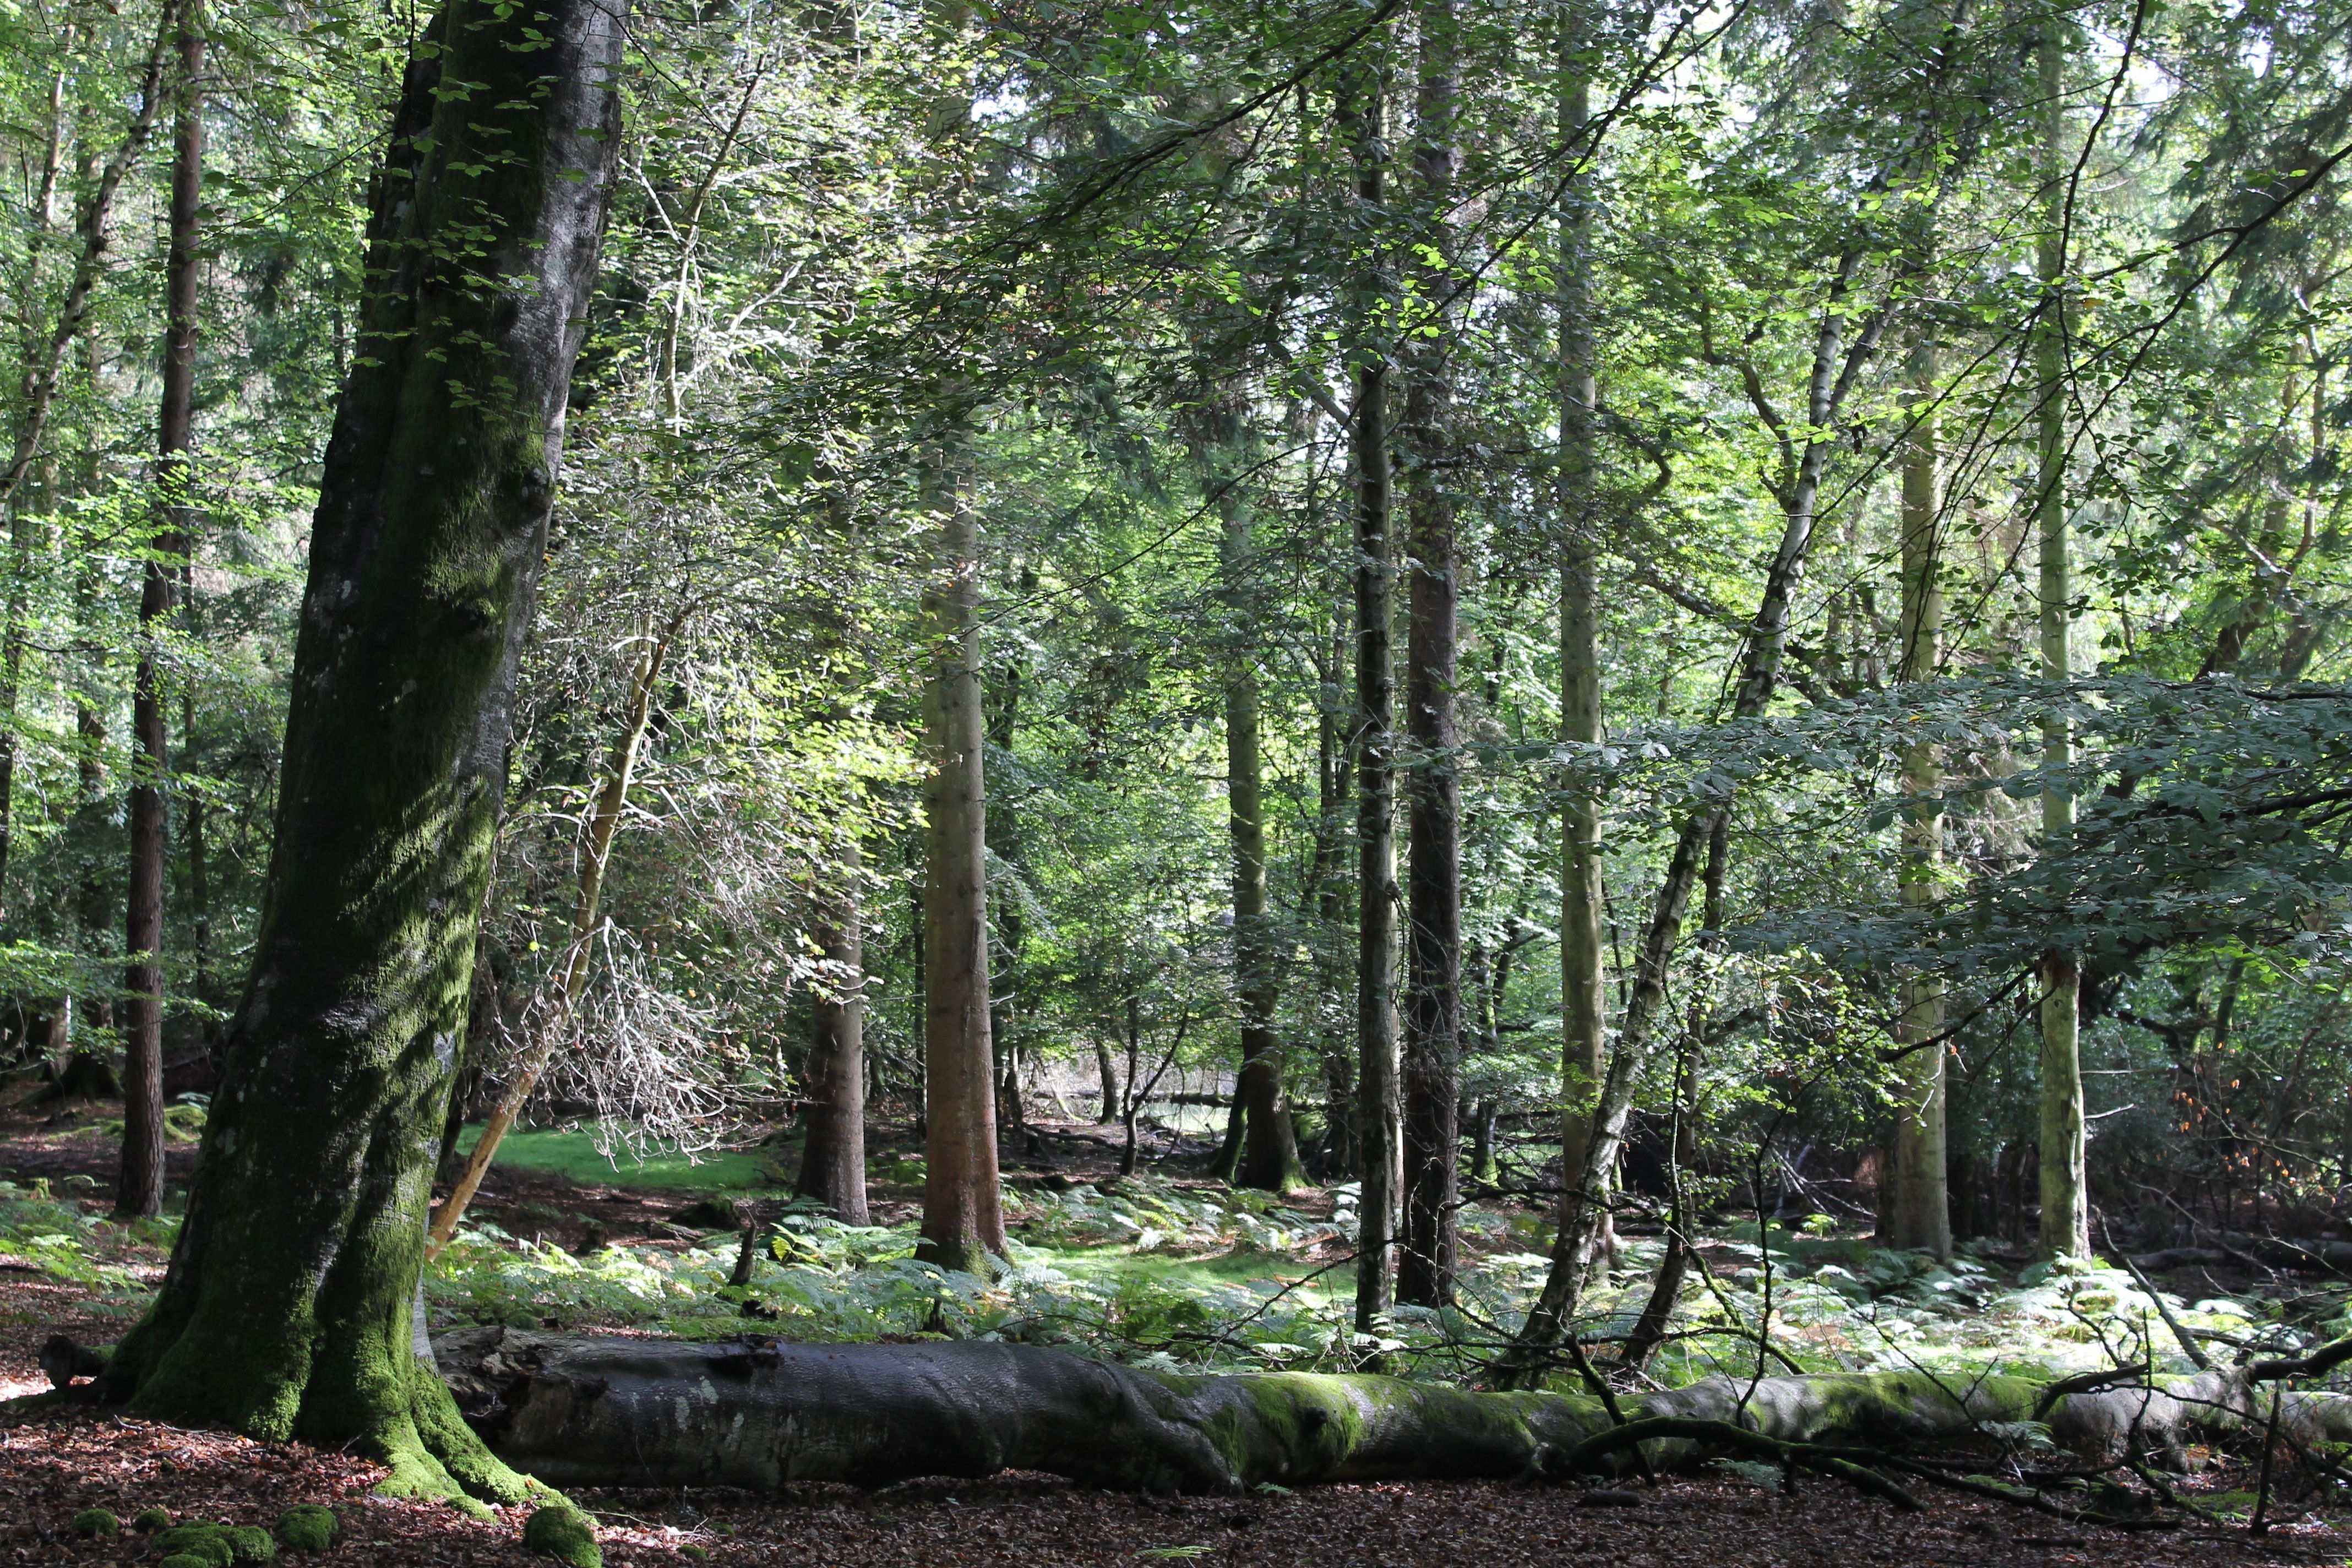 In medieval times a forest meant an area preserved for royal hunting, and not a wooded area as it does today. 